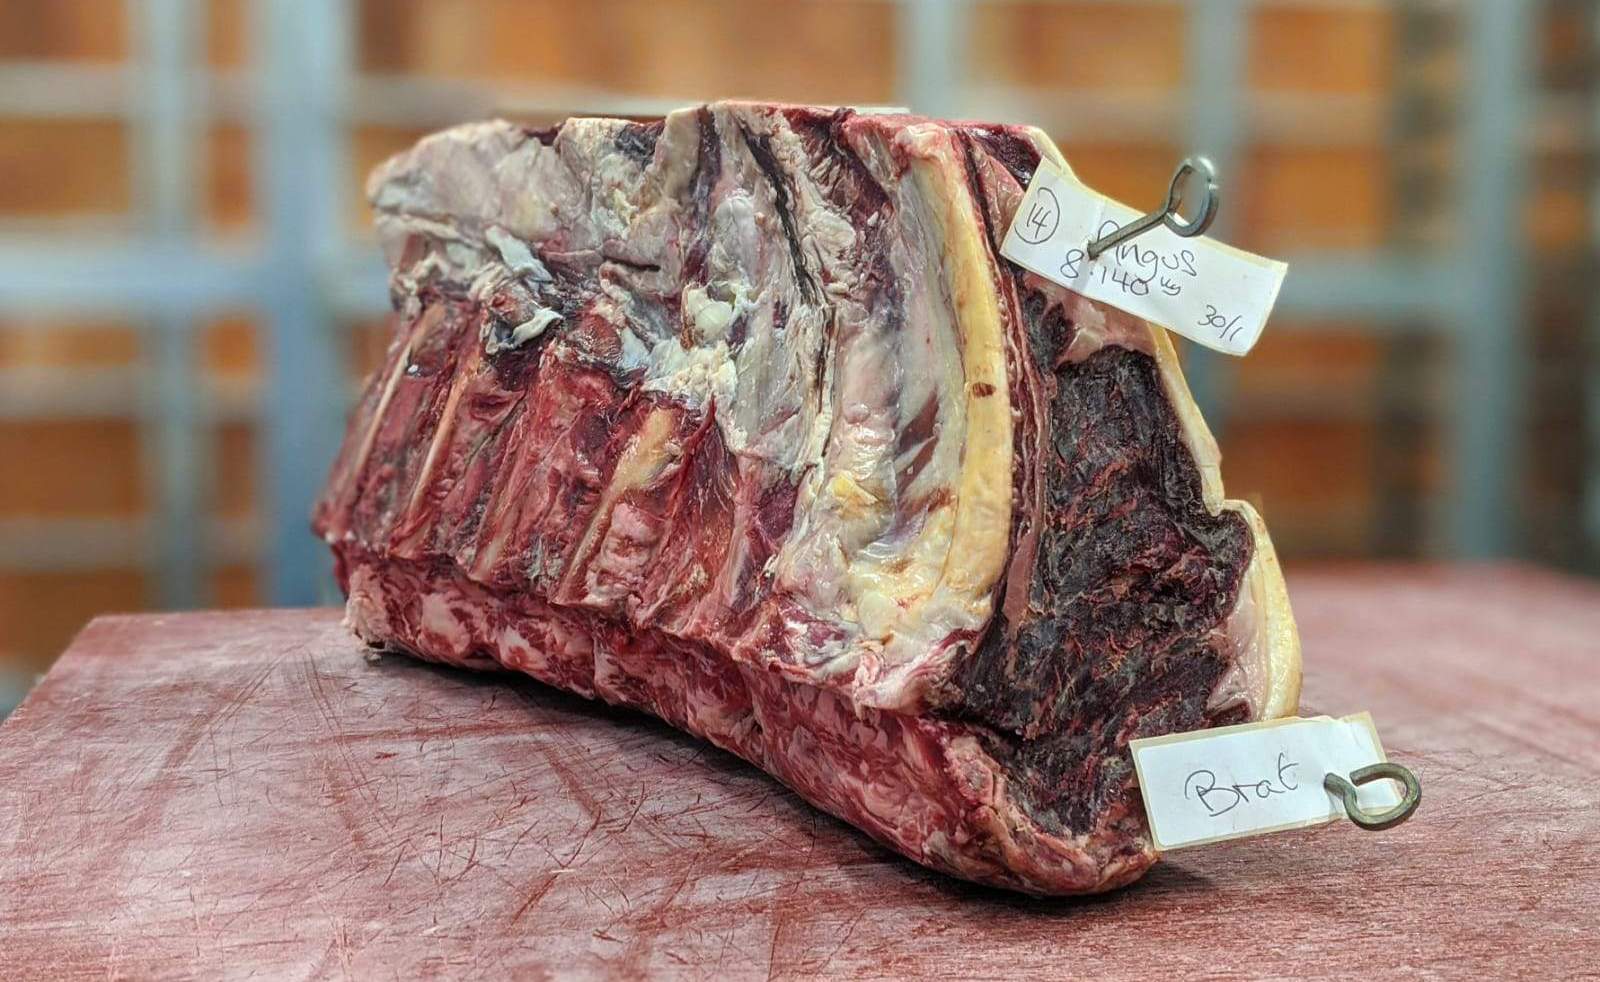 Dry-aged beef for Brat restaurant in London